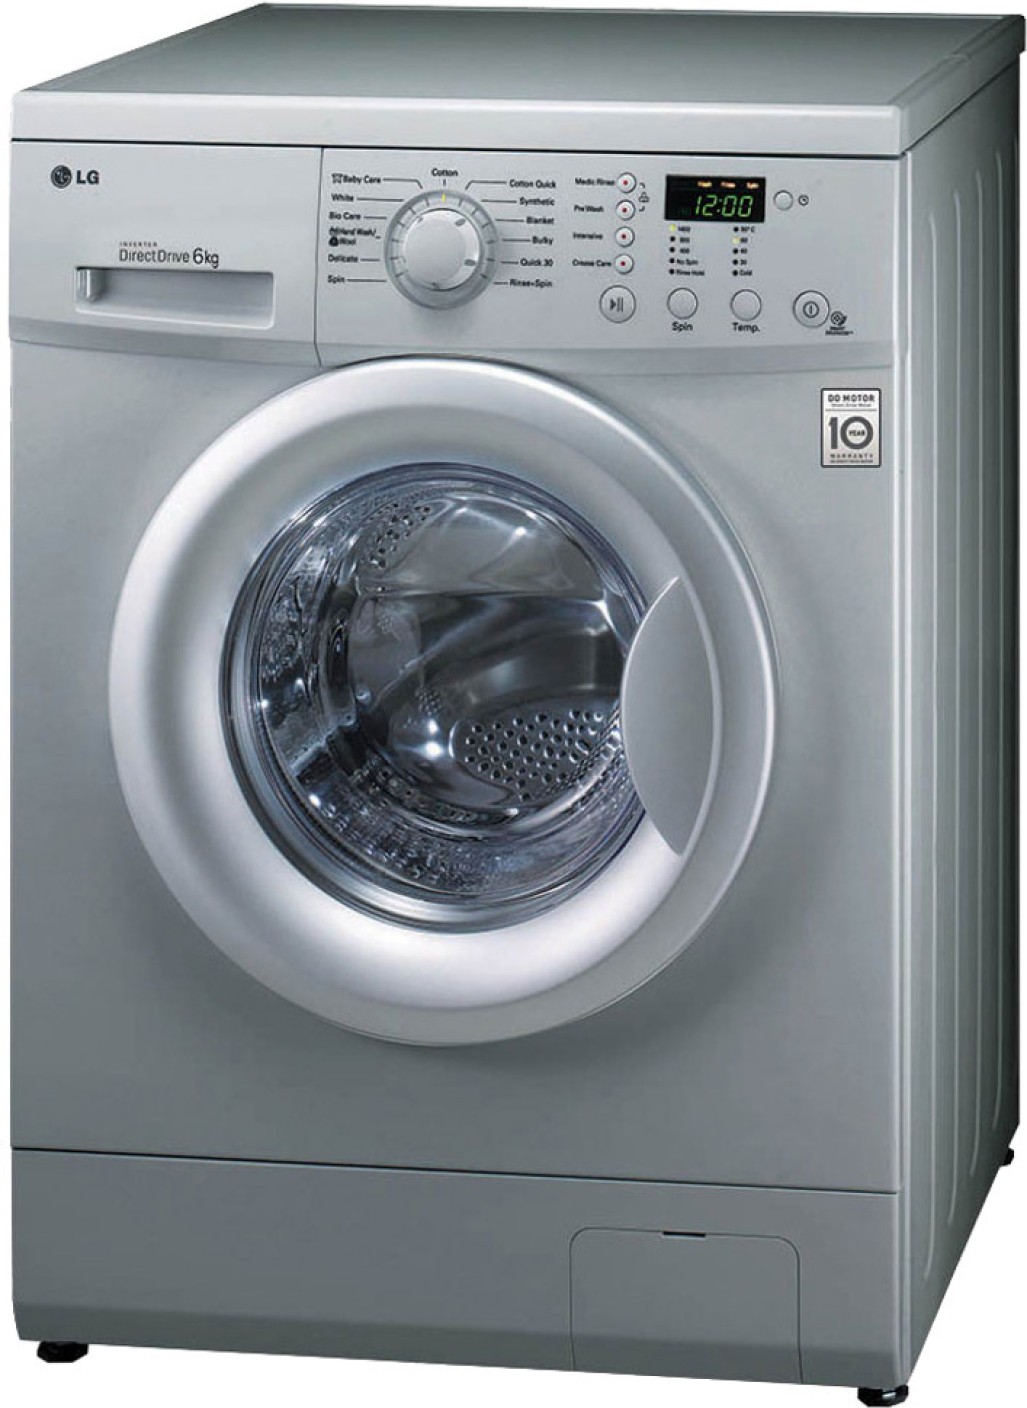 LG 6 kg Fully Automatic Front Load Washing Machine Price in India - Buy ...